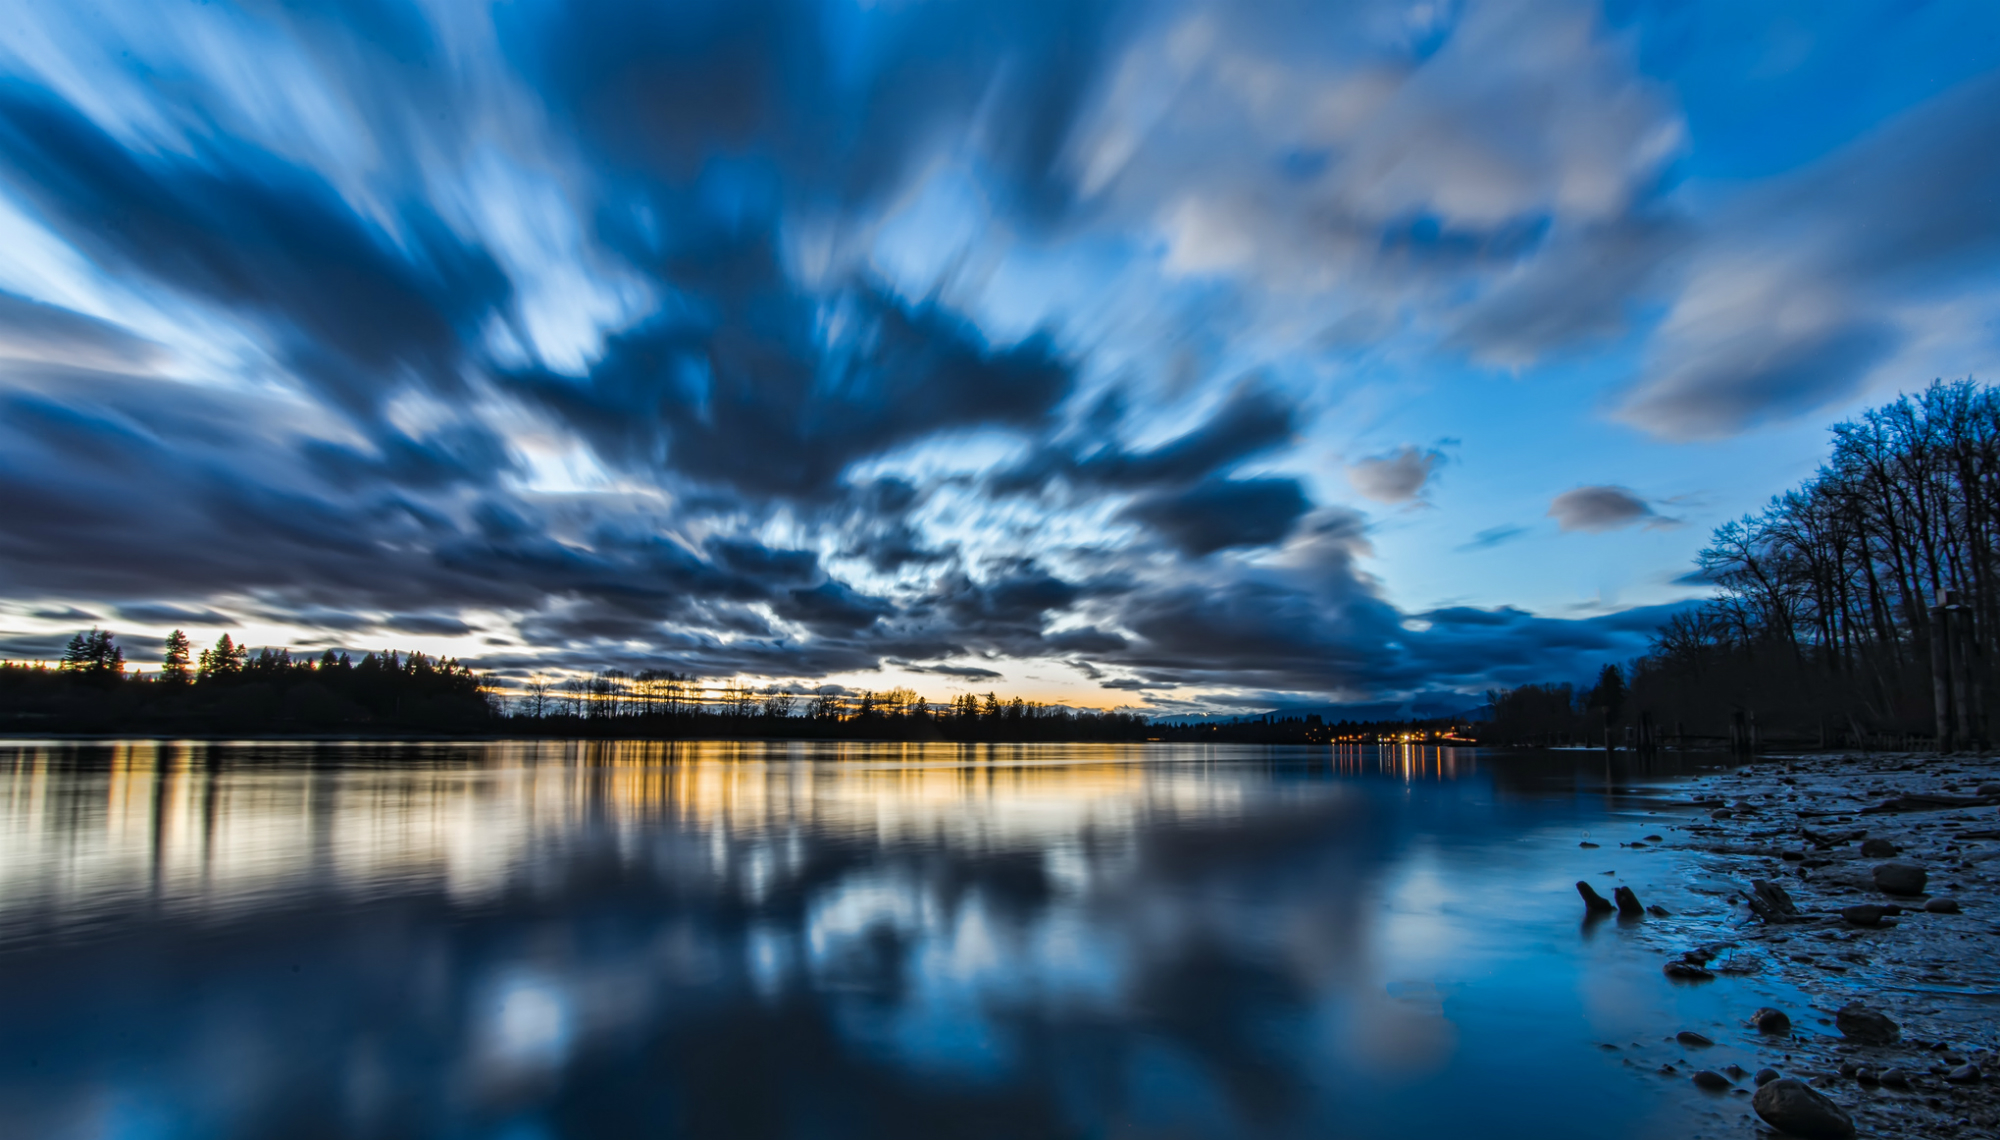 canada, British, Columbia, Lake, Water, Surface, Shore, Trees, Evening, Sunset, Sky, Clouds, Reflection, Blue Wallpaper